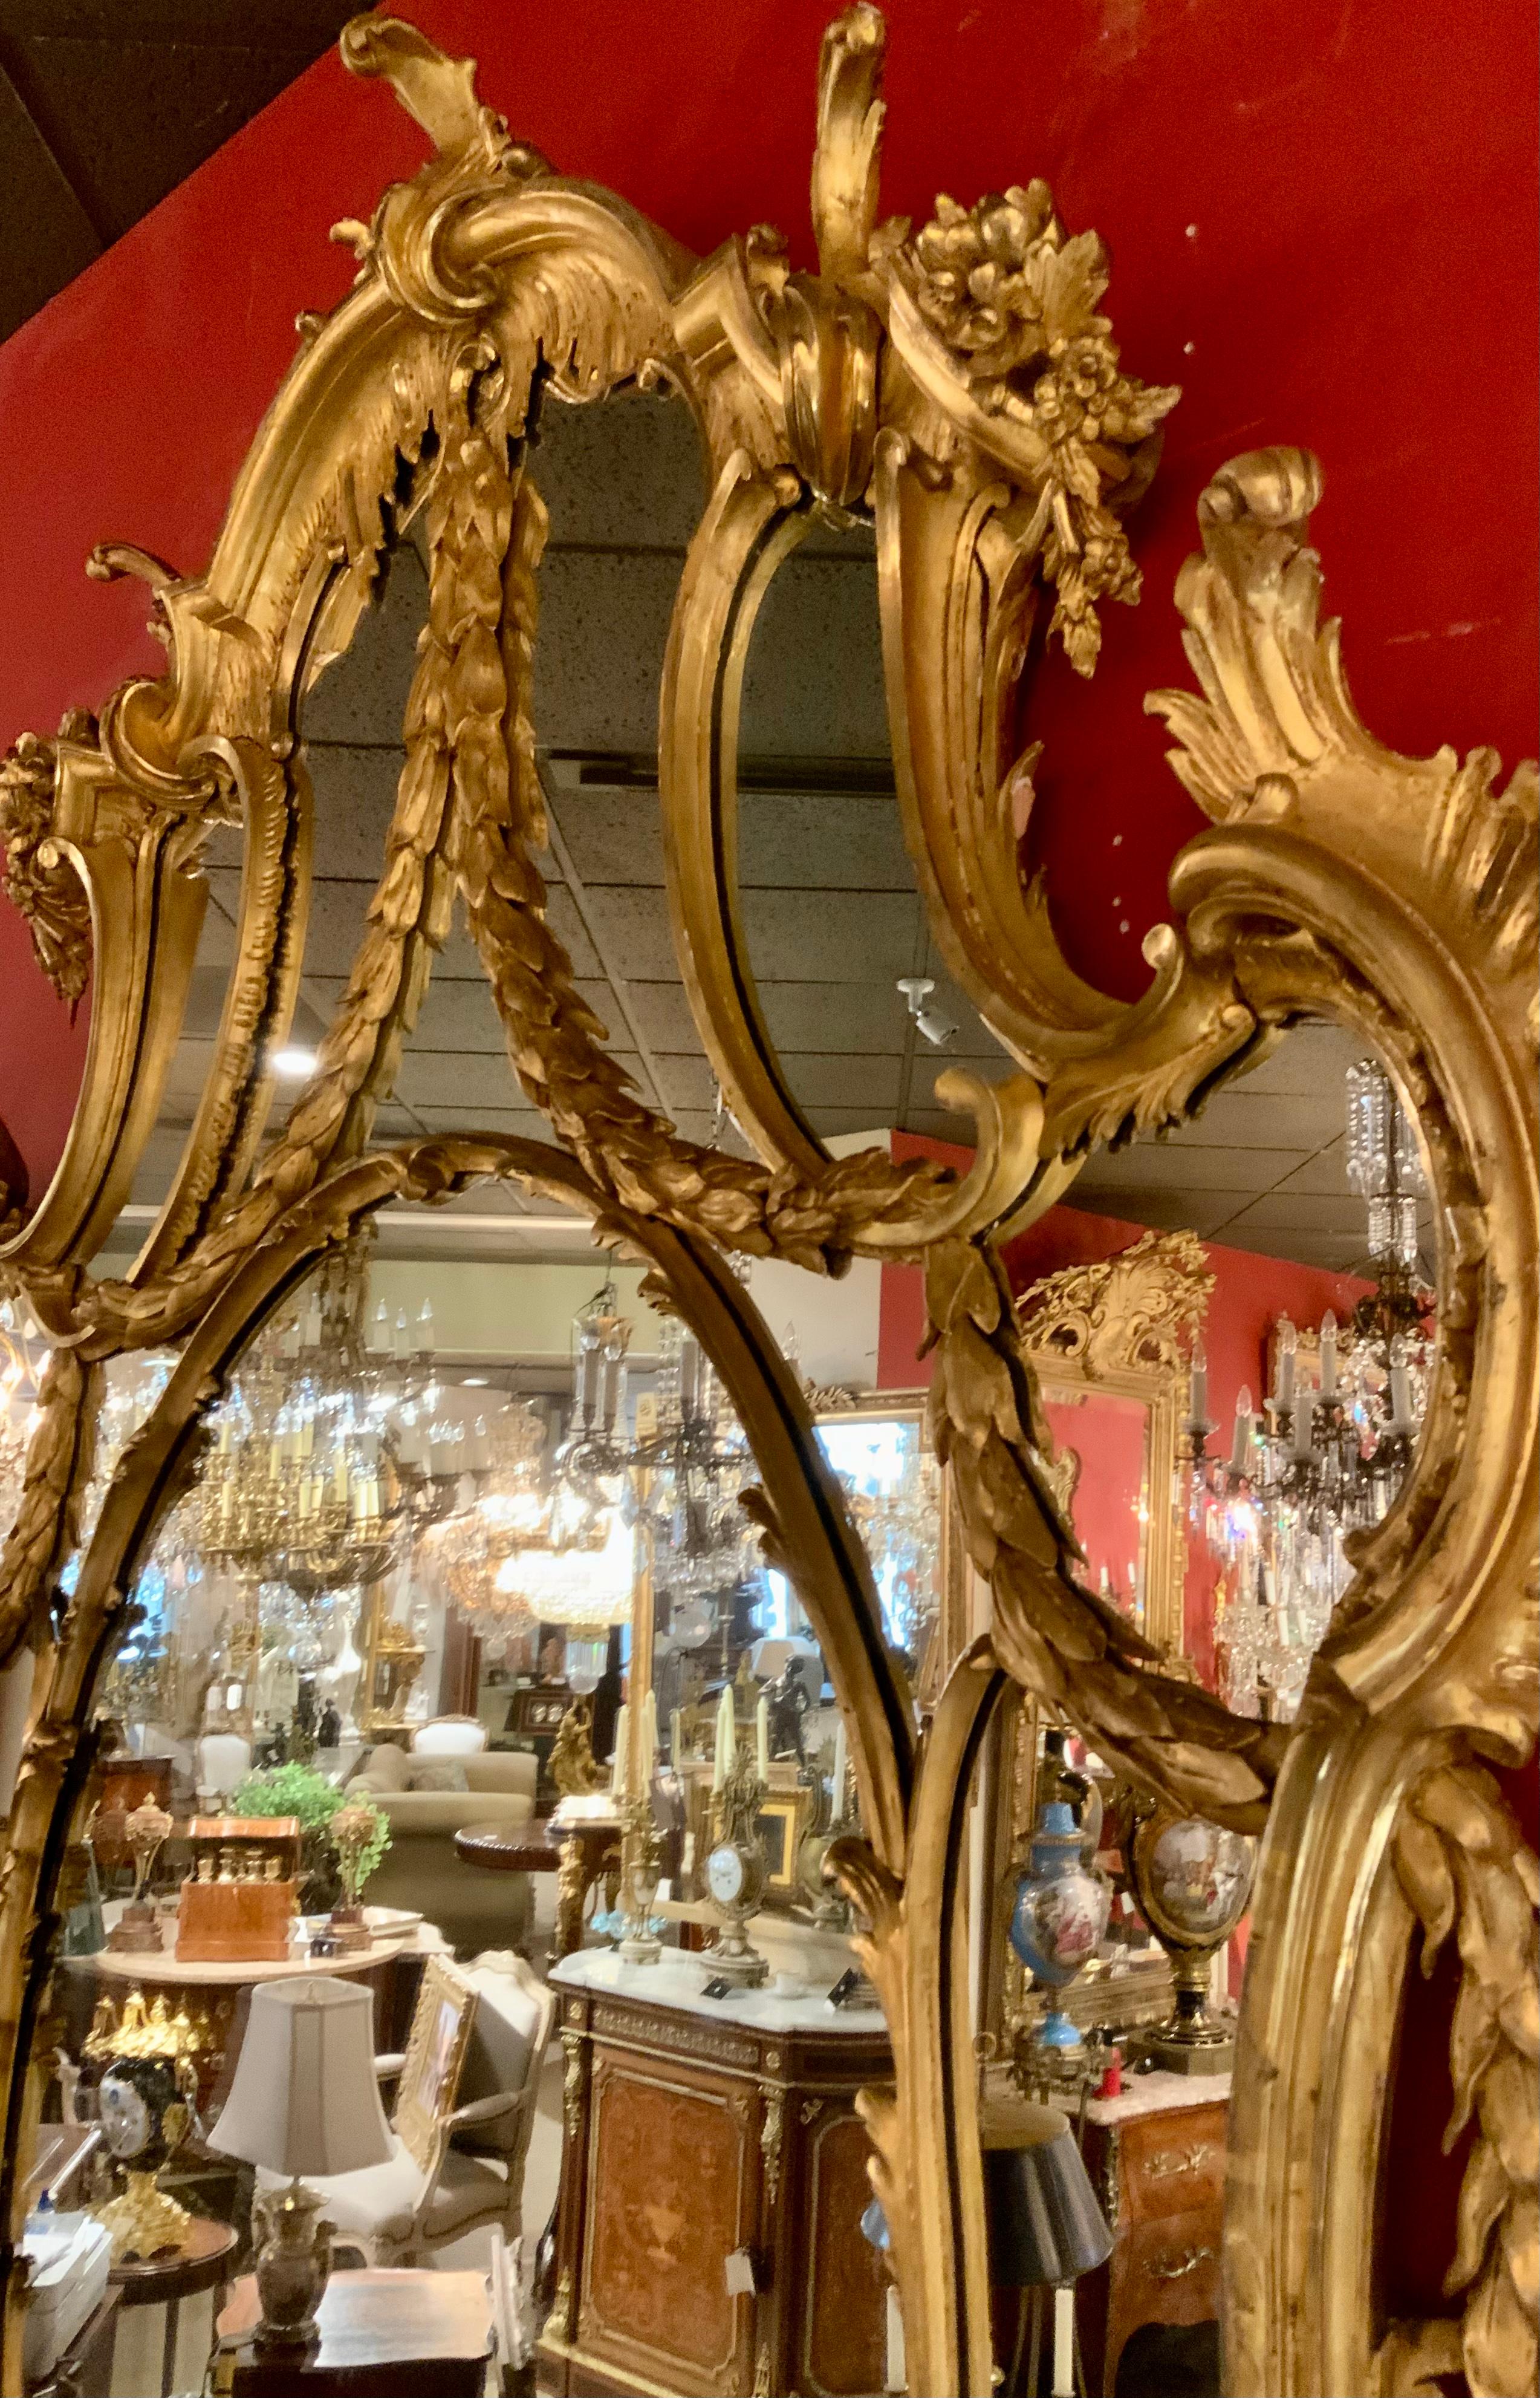 British Large Giltwood Chinese Chippendale Mirror, George III Style, 18th Century For Sale